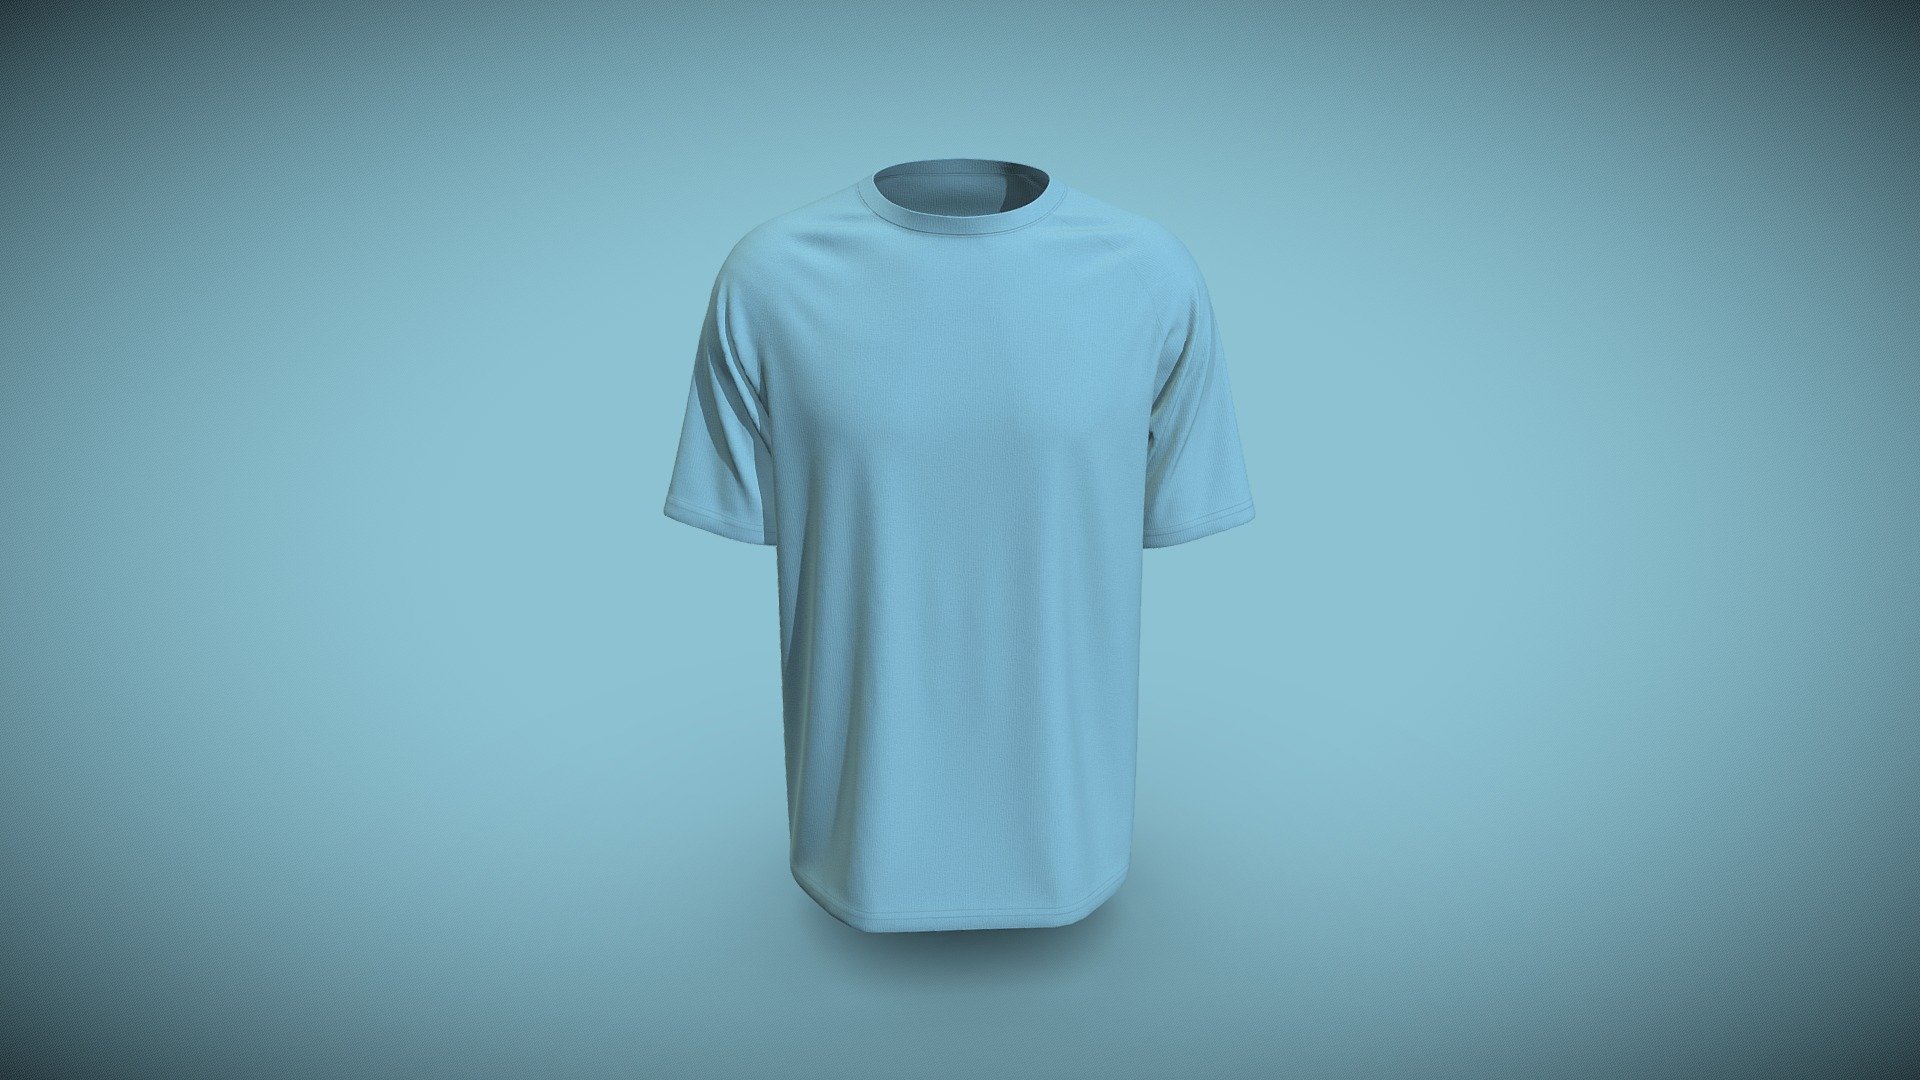 Cloth Title = Raglan Sleeve Round Neck Tee Design  

SKU = DG100140 

Category = Unisex 

Product Type = T-Shirt 

Cloth Length = Regular 

Body Fit = Regular Fit 

Occasion = Casual 
 
Sleeve Style = Raglan Sleeve 


Our Services:

3D Apparel Design.

OBJ,FBX,GLTF Making with High/Low Poly.

Fabric Digitalization.

Mockup making.

3D Teck Pack.

Pattern Making.

2D Illustration.

Cloth Animation and 360 Spin Video.


Contact us:- 

Email: info@digitalfashionwear.com 

Website: https://digitalfashionwear.com 


We designed all the types of cloth specially focused on product visualization, e-commerce, fitting, and production. 

We will design: 

T-shirts 

Polo shirts 

Hoodies 

Sweatshirt 

Jackets 

Shirts 

TankTops 

Trousers 

Bras 

Underwear 

Blazer 

Aprons 

Leggings 

and All Fashion items. 





Our goal is to make sure what we provide you, meets your demand 3d model